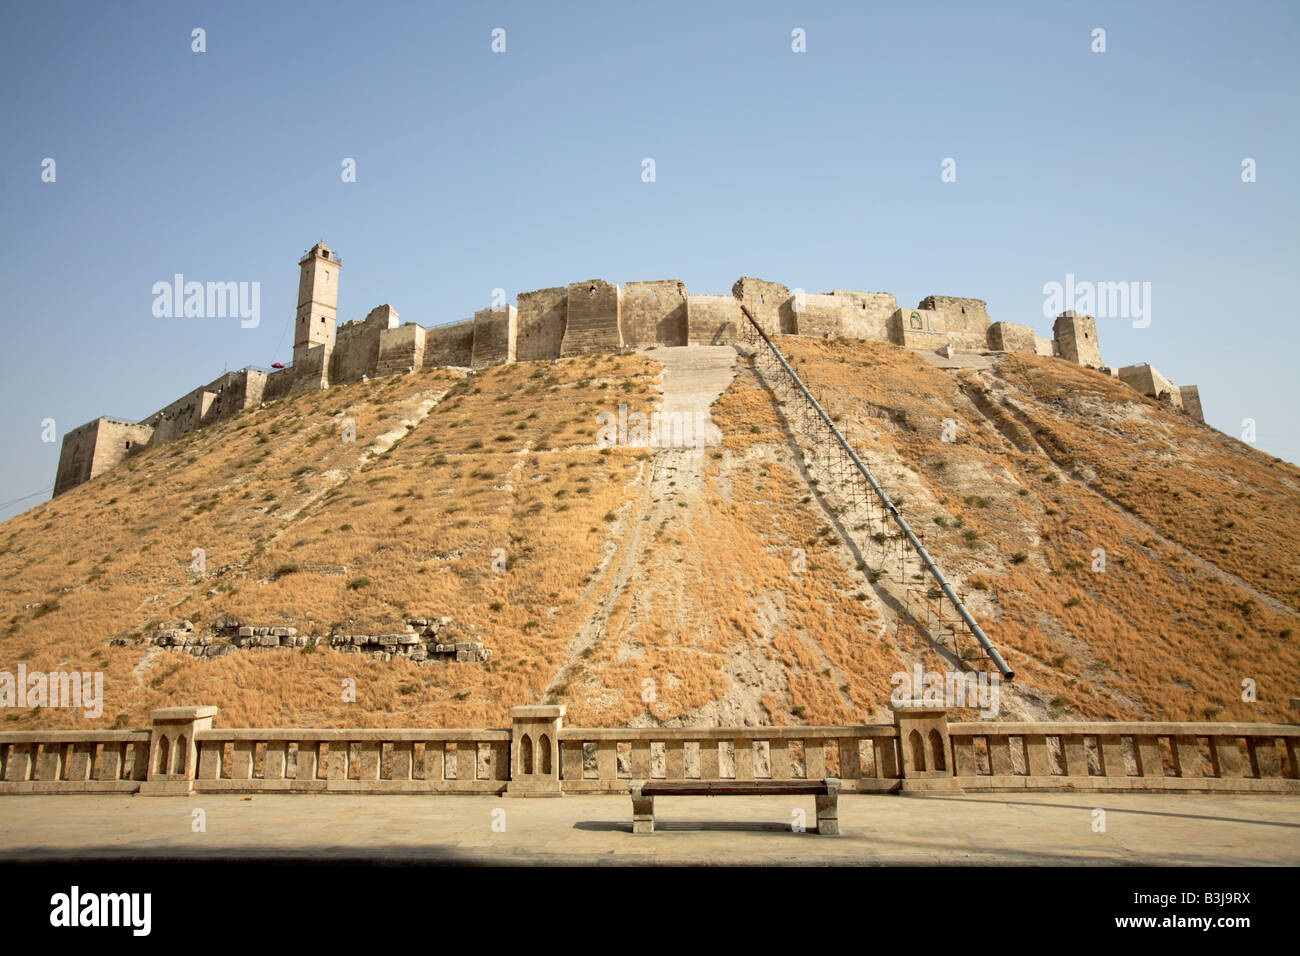 The ancient walls of the citadel of Aleppo, Syria Stock Photo